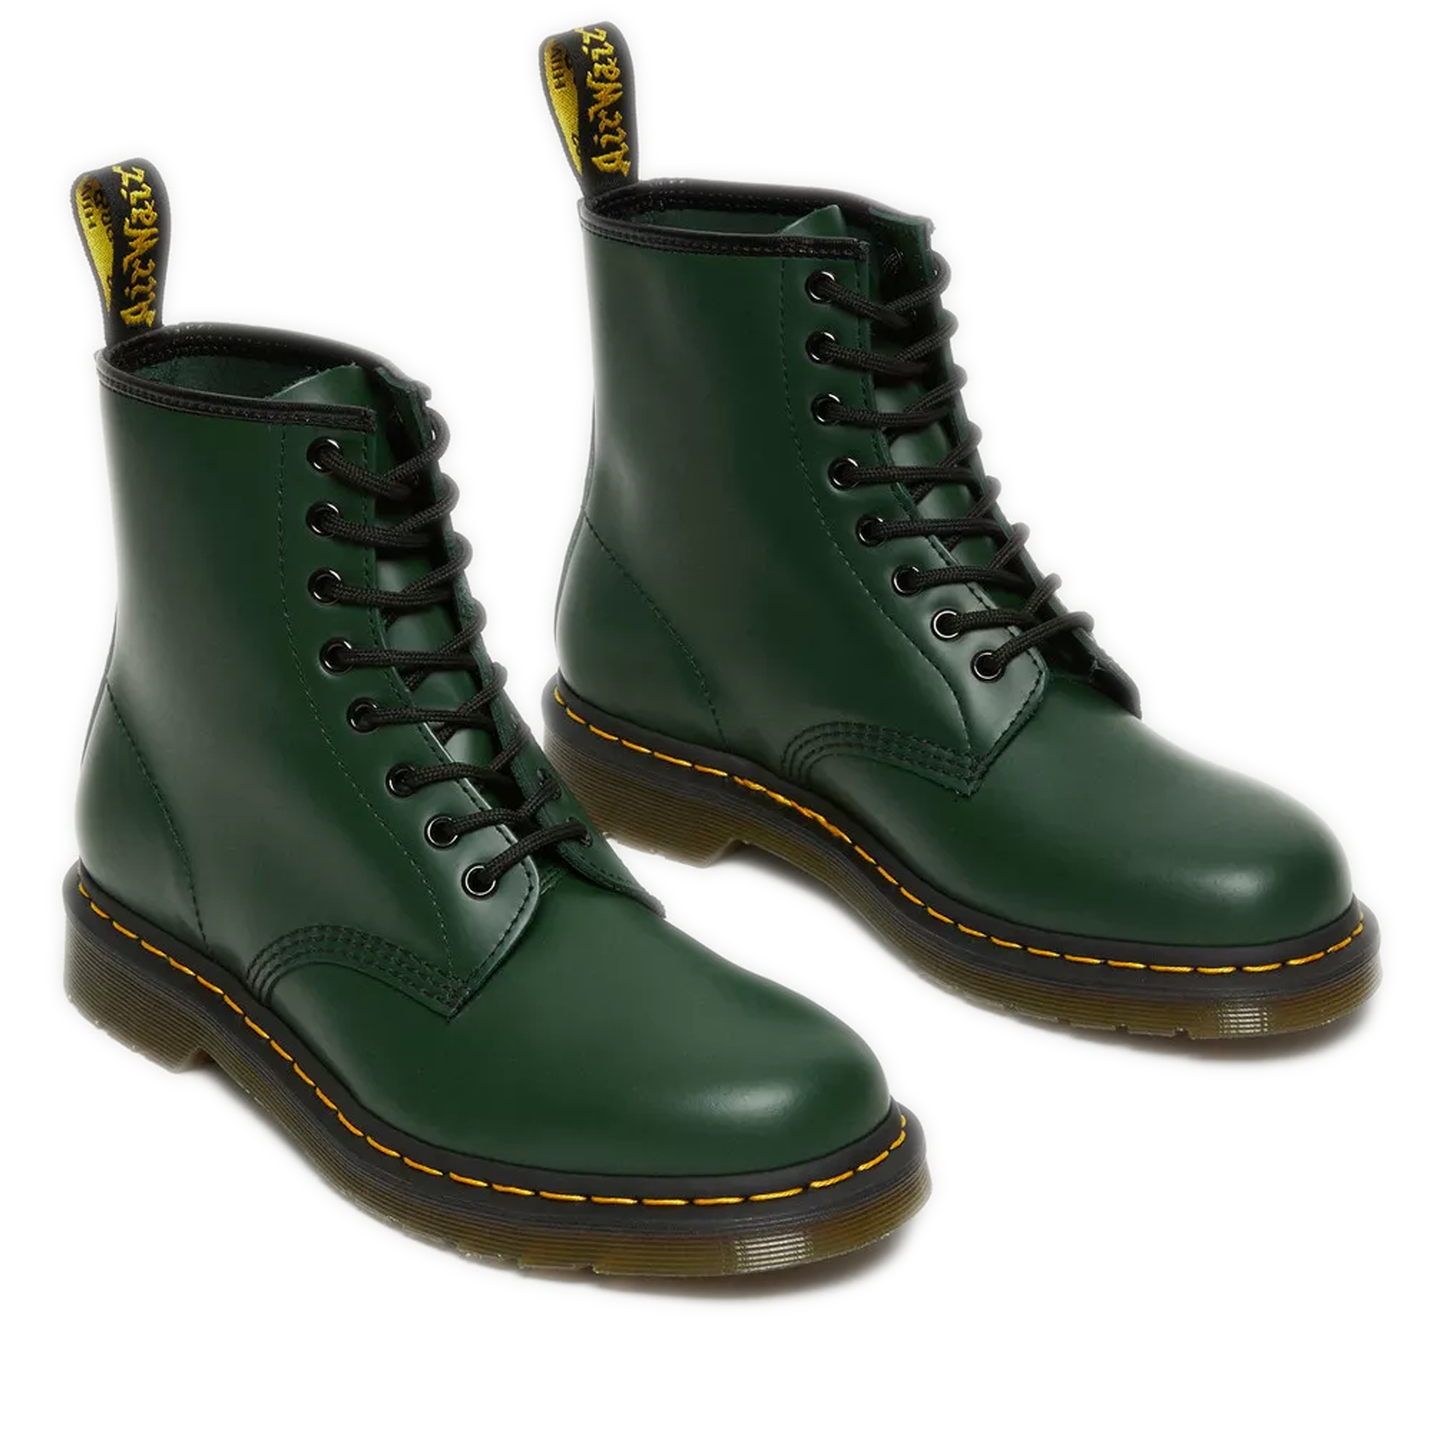 Men's Dr. Martens 1460 Smooth Leather Lace Up Boots - Green